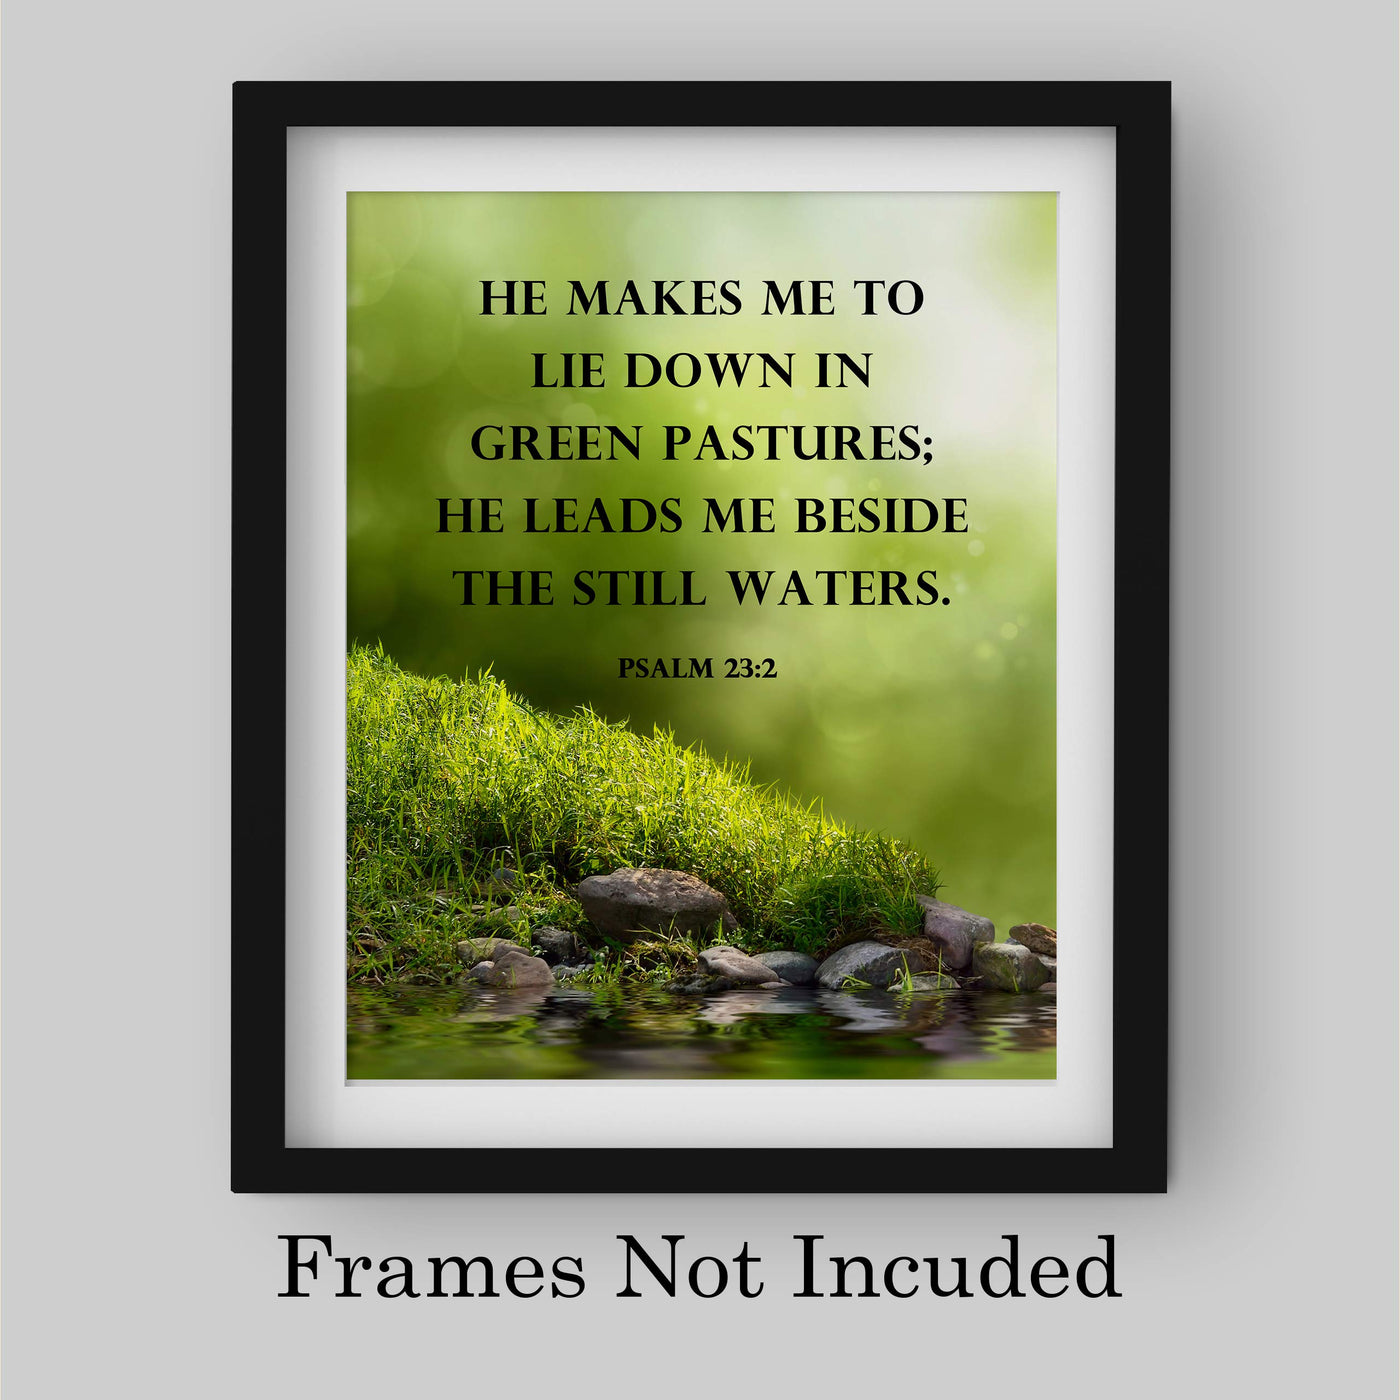 He Leads Me Beside the Still Waters-Psalms 23:2- Bible Verse Wall Art -8 x 10 Scripture Wall Print- Ready to Frame. Religious Home-Office-Sunday School Decor. Great Christian Gift of Faith!